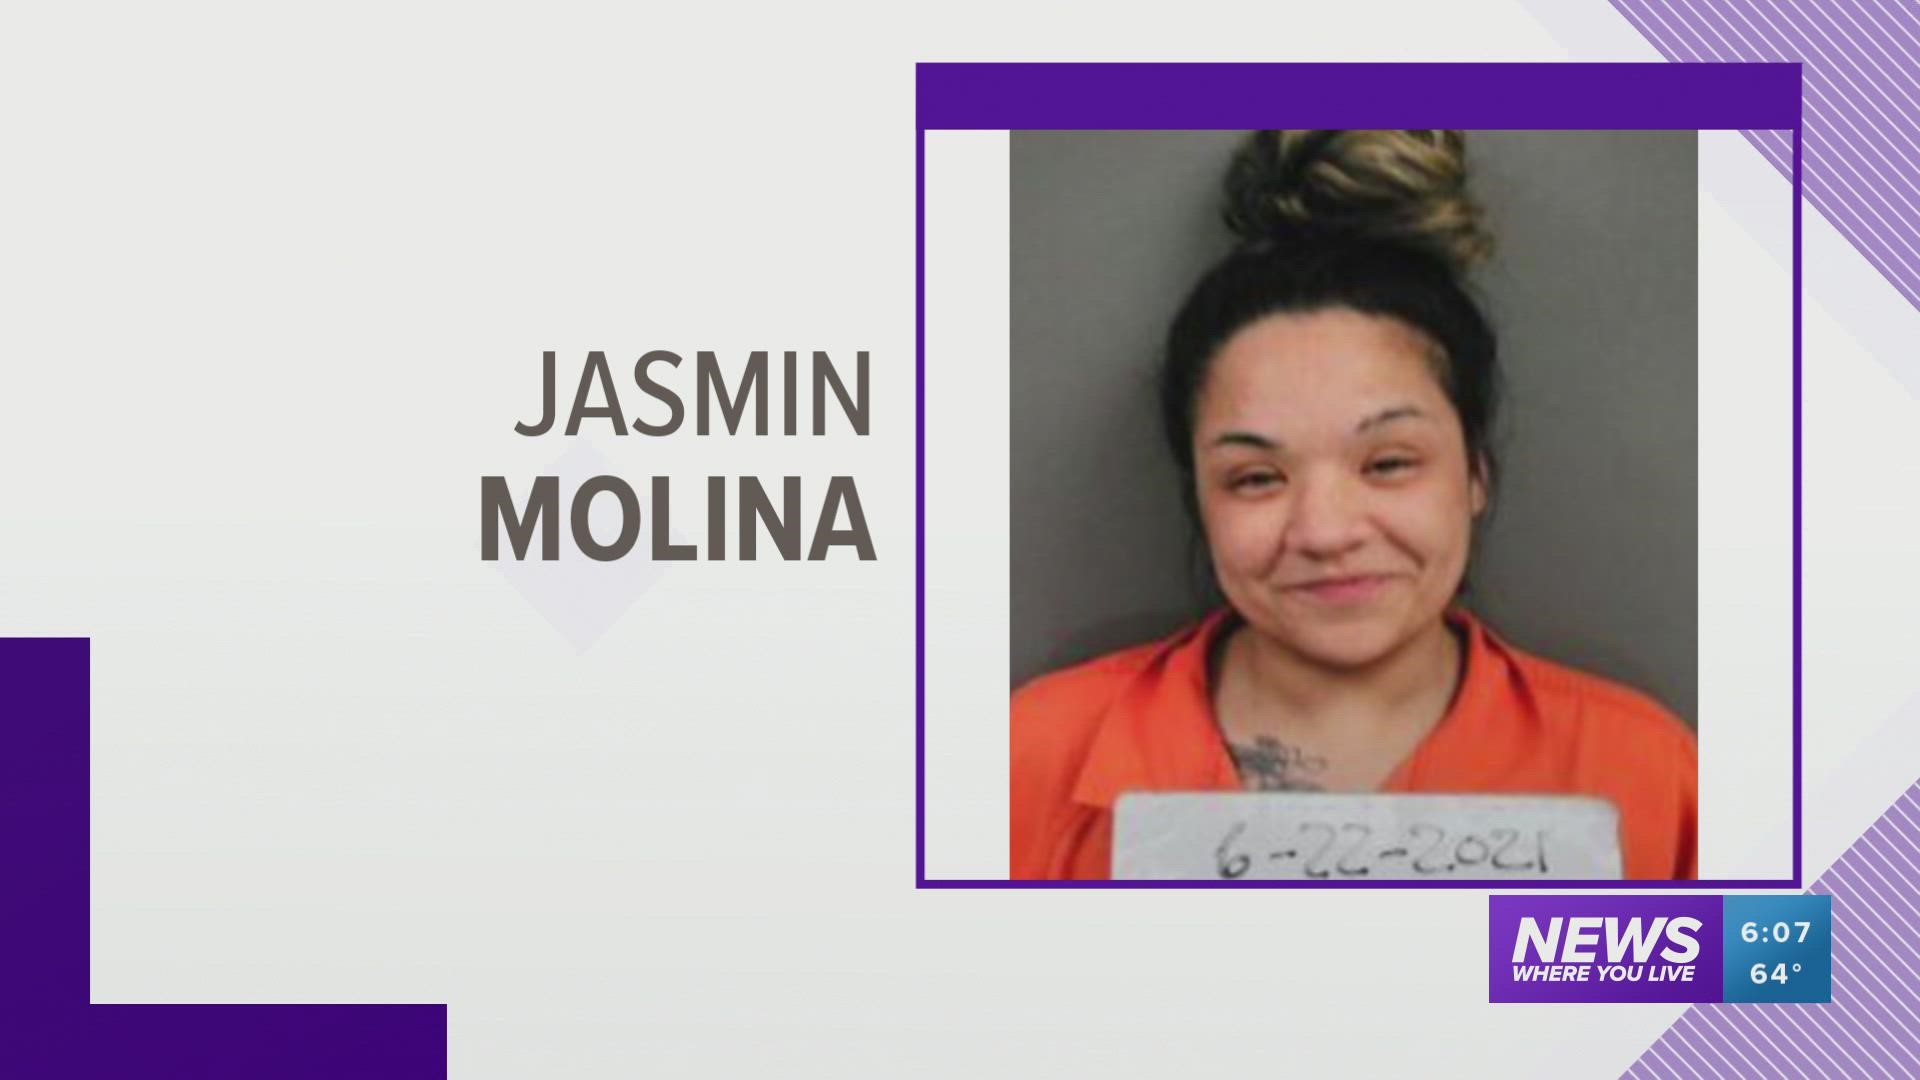 26-year-old Jasmin Molina will serve three years in prison for using others' identities to file for pandemic unemployment benefits.